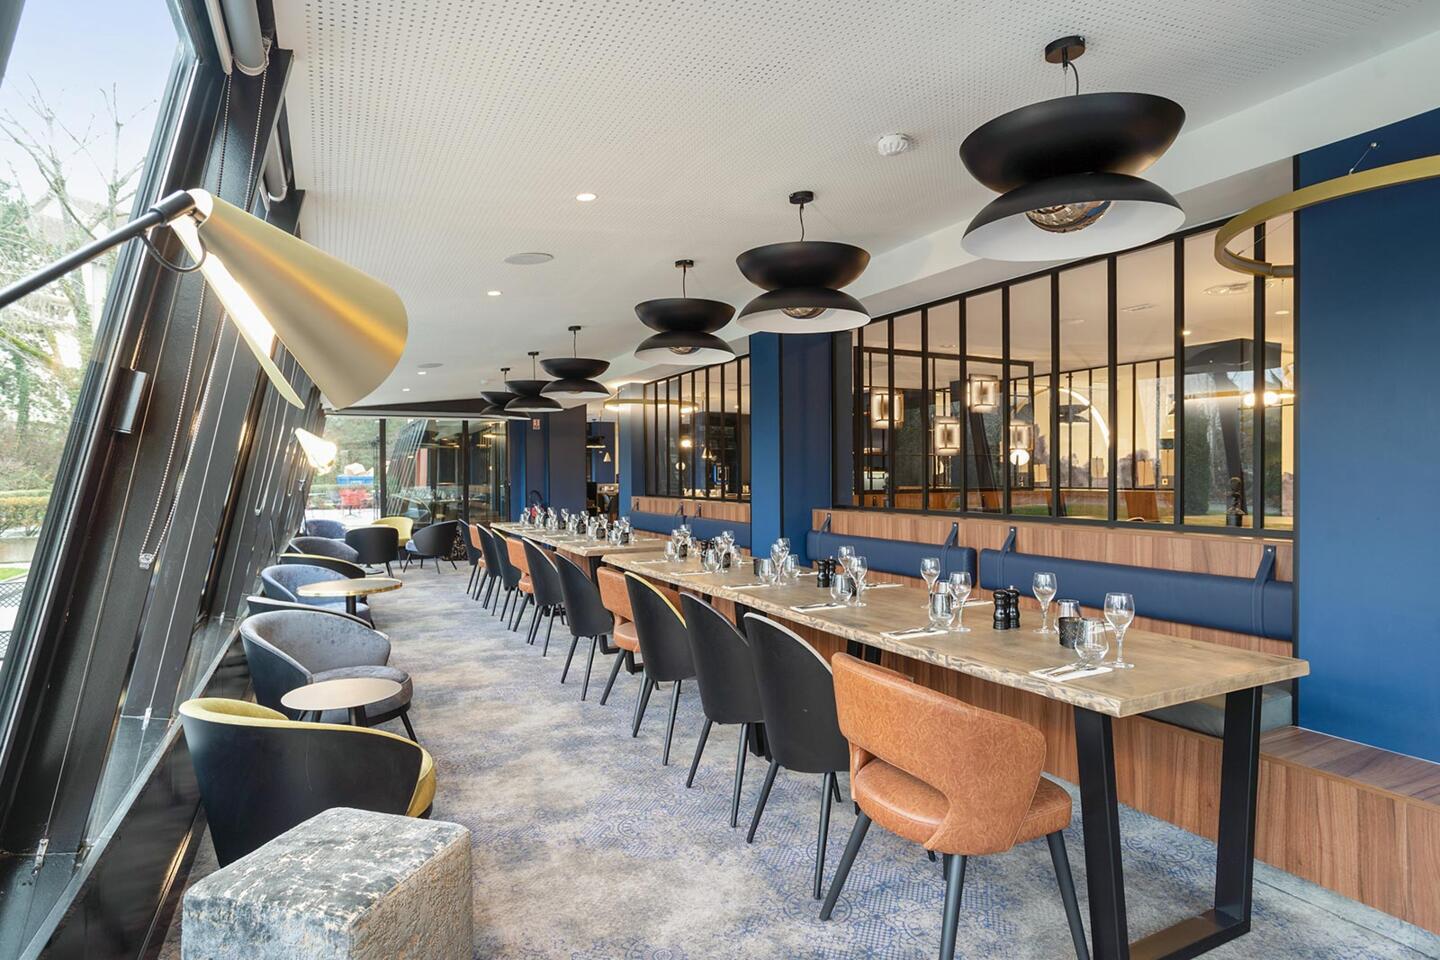 Chic dining space at Bistrot City Geneva Airport Ferney-Voltaire with gray velvet seating and brown leather stools, set wooden tables, designer suspended lamps, and a large window overlooking the outdoors.